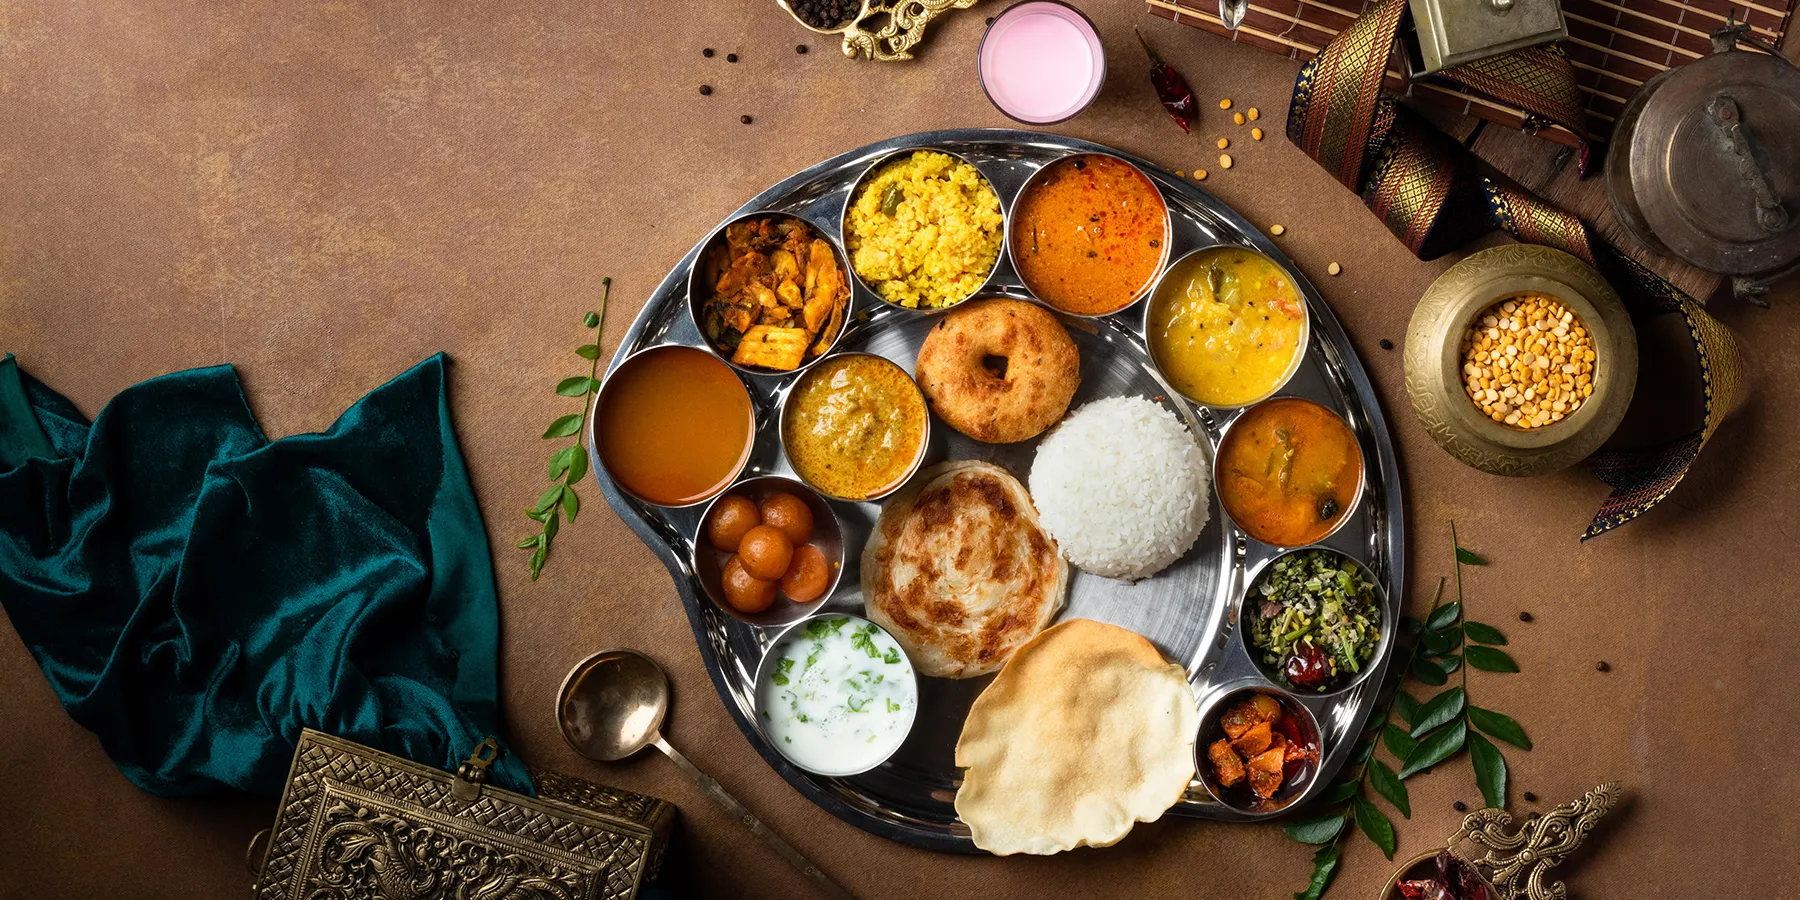 What are some common misconceptions about Indian food